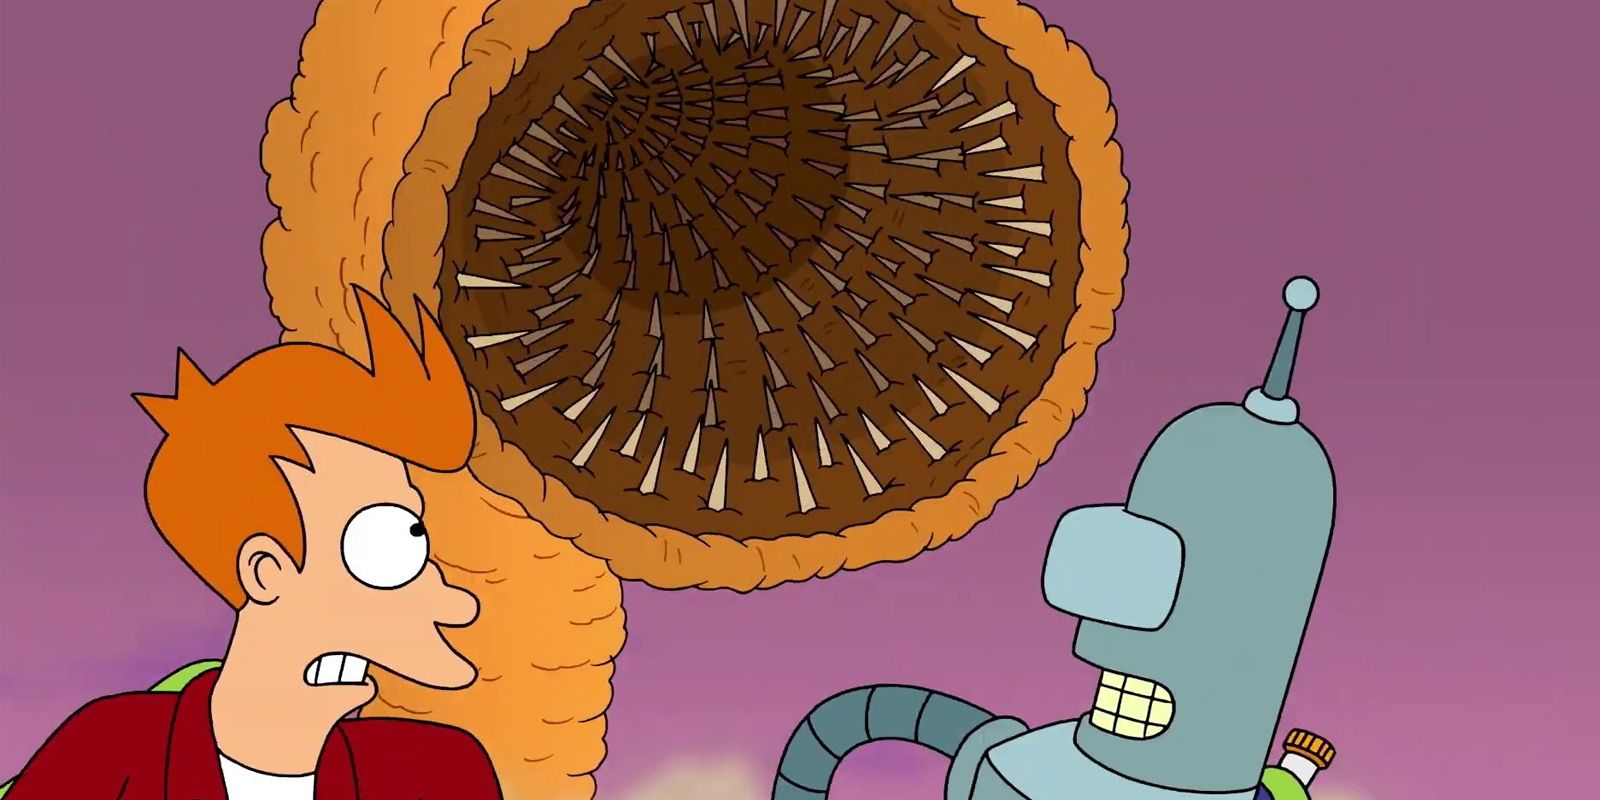 Fry and Bender running from a sandworm in Futurama